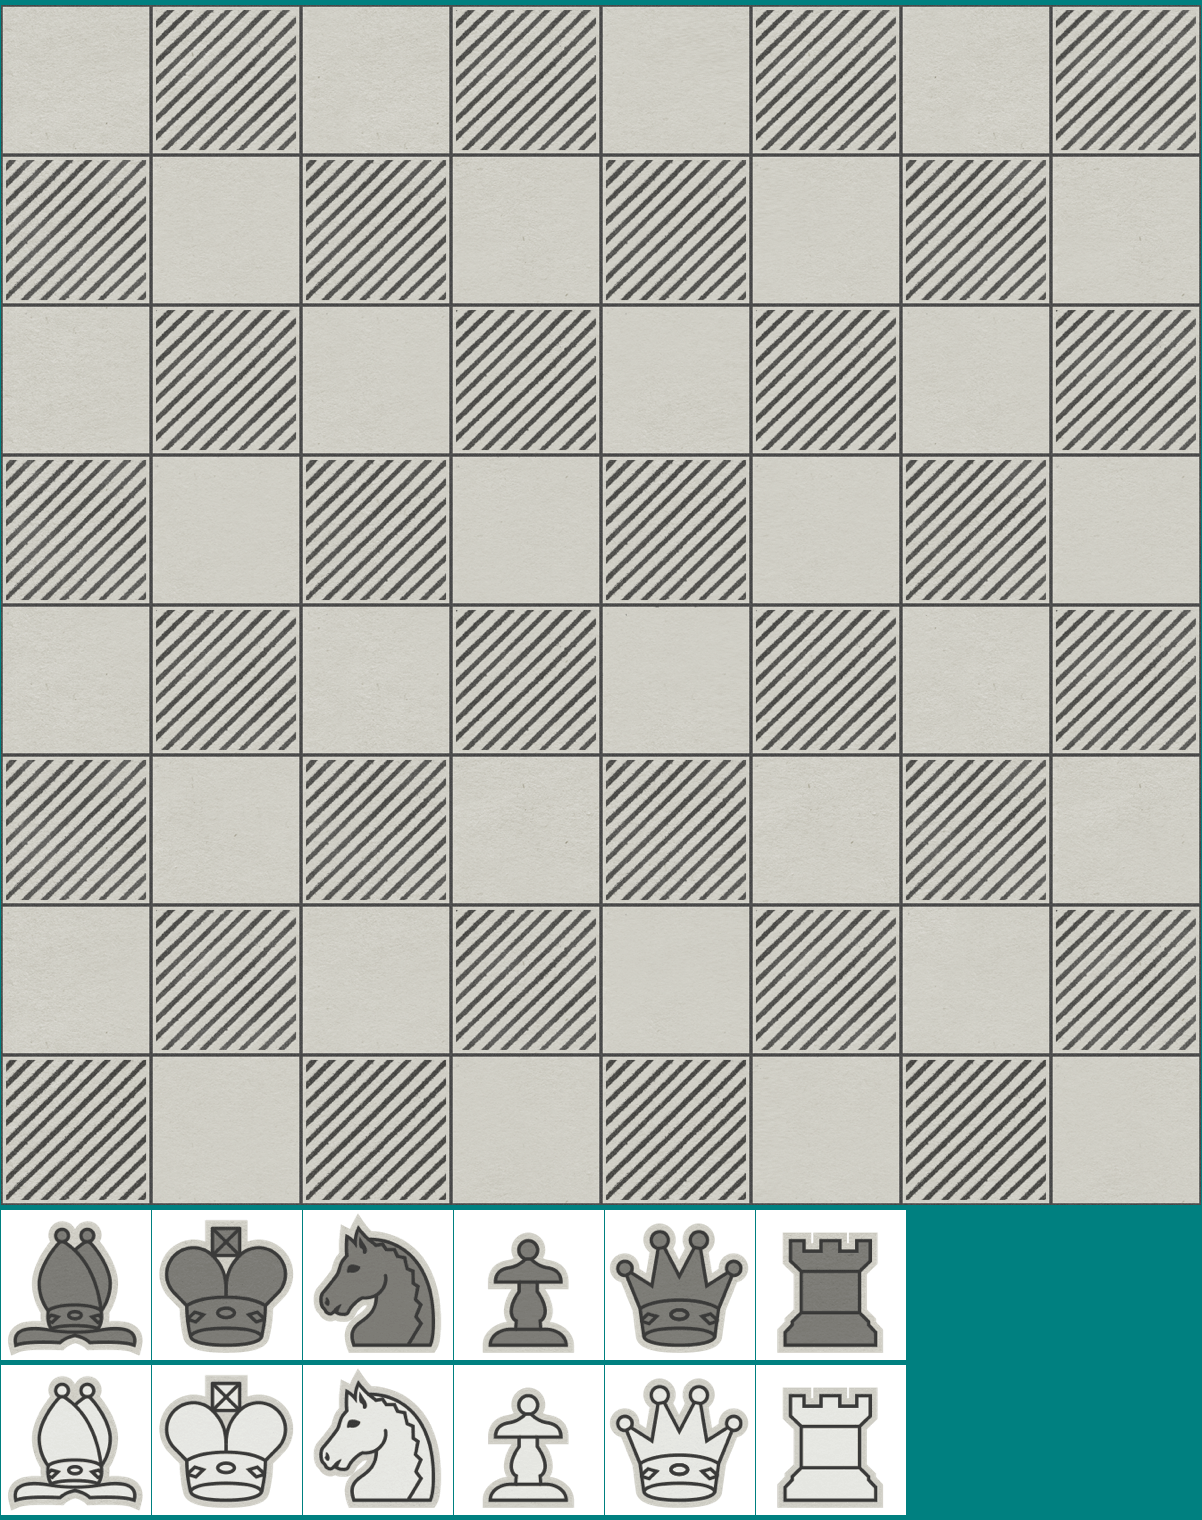 Chess - Board and Chess Pieces (Newspaper)